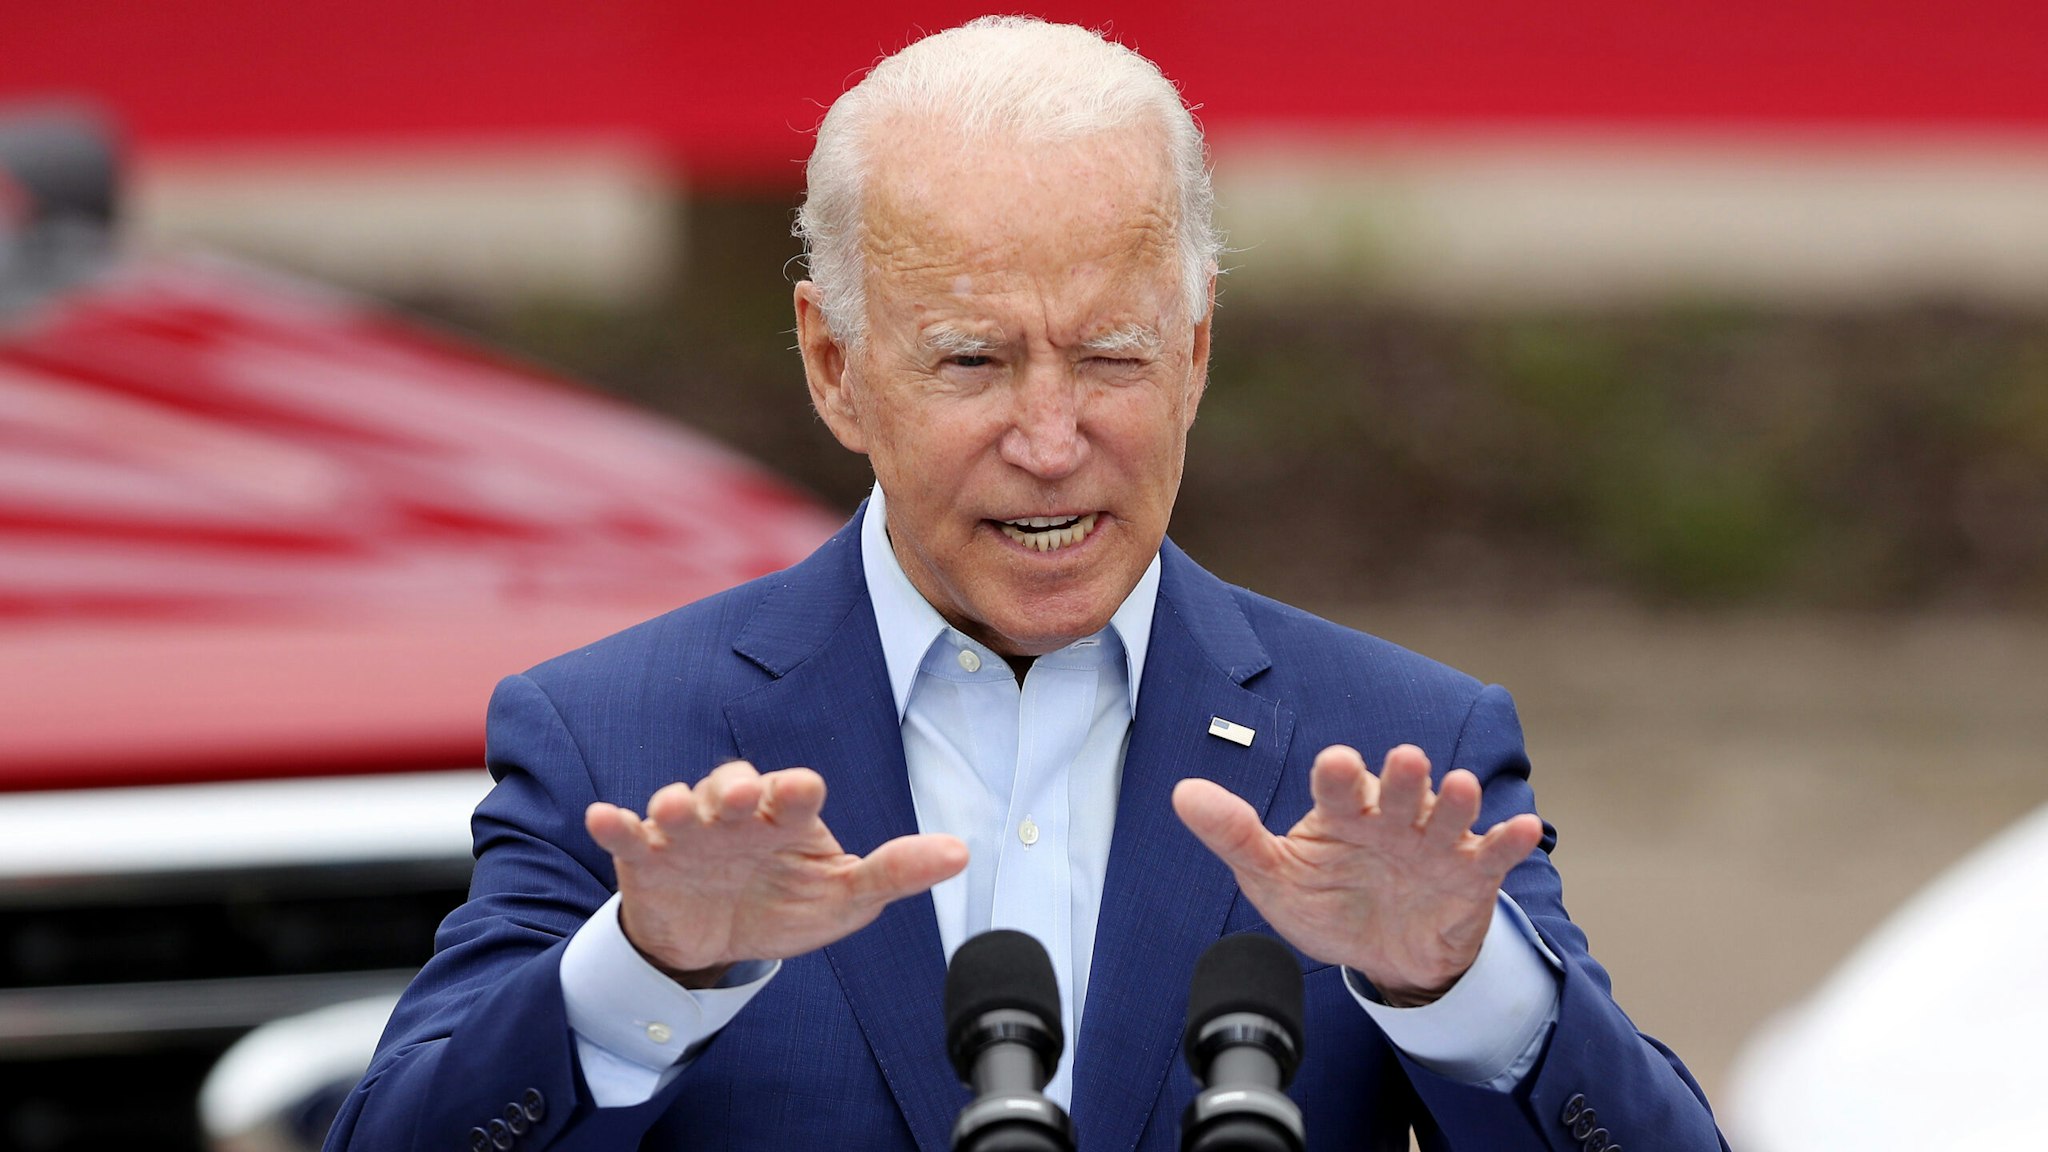 WARREN, MICHIGAN - SEPTEMBER 09: Democratic presidential nominee and former Vice President Joe Biden delivers remarks in the parking lot outside the United Auto Workers Region 1 offices on September 09, 2020 in Warren, Michigan. Biden is campaigning in Michigan, a state President Donald Trump won in 2016 by less than 11,000 votes, the narrowest margin of victory in state's presidential election history.